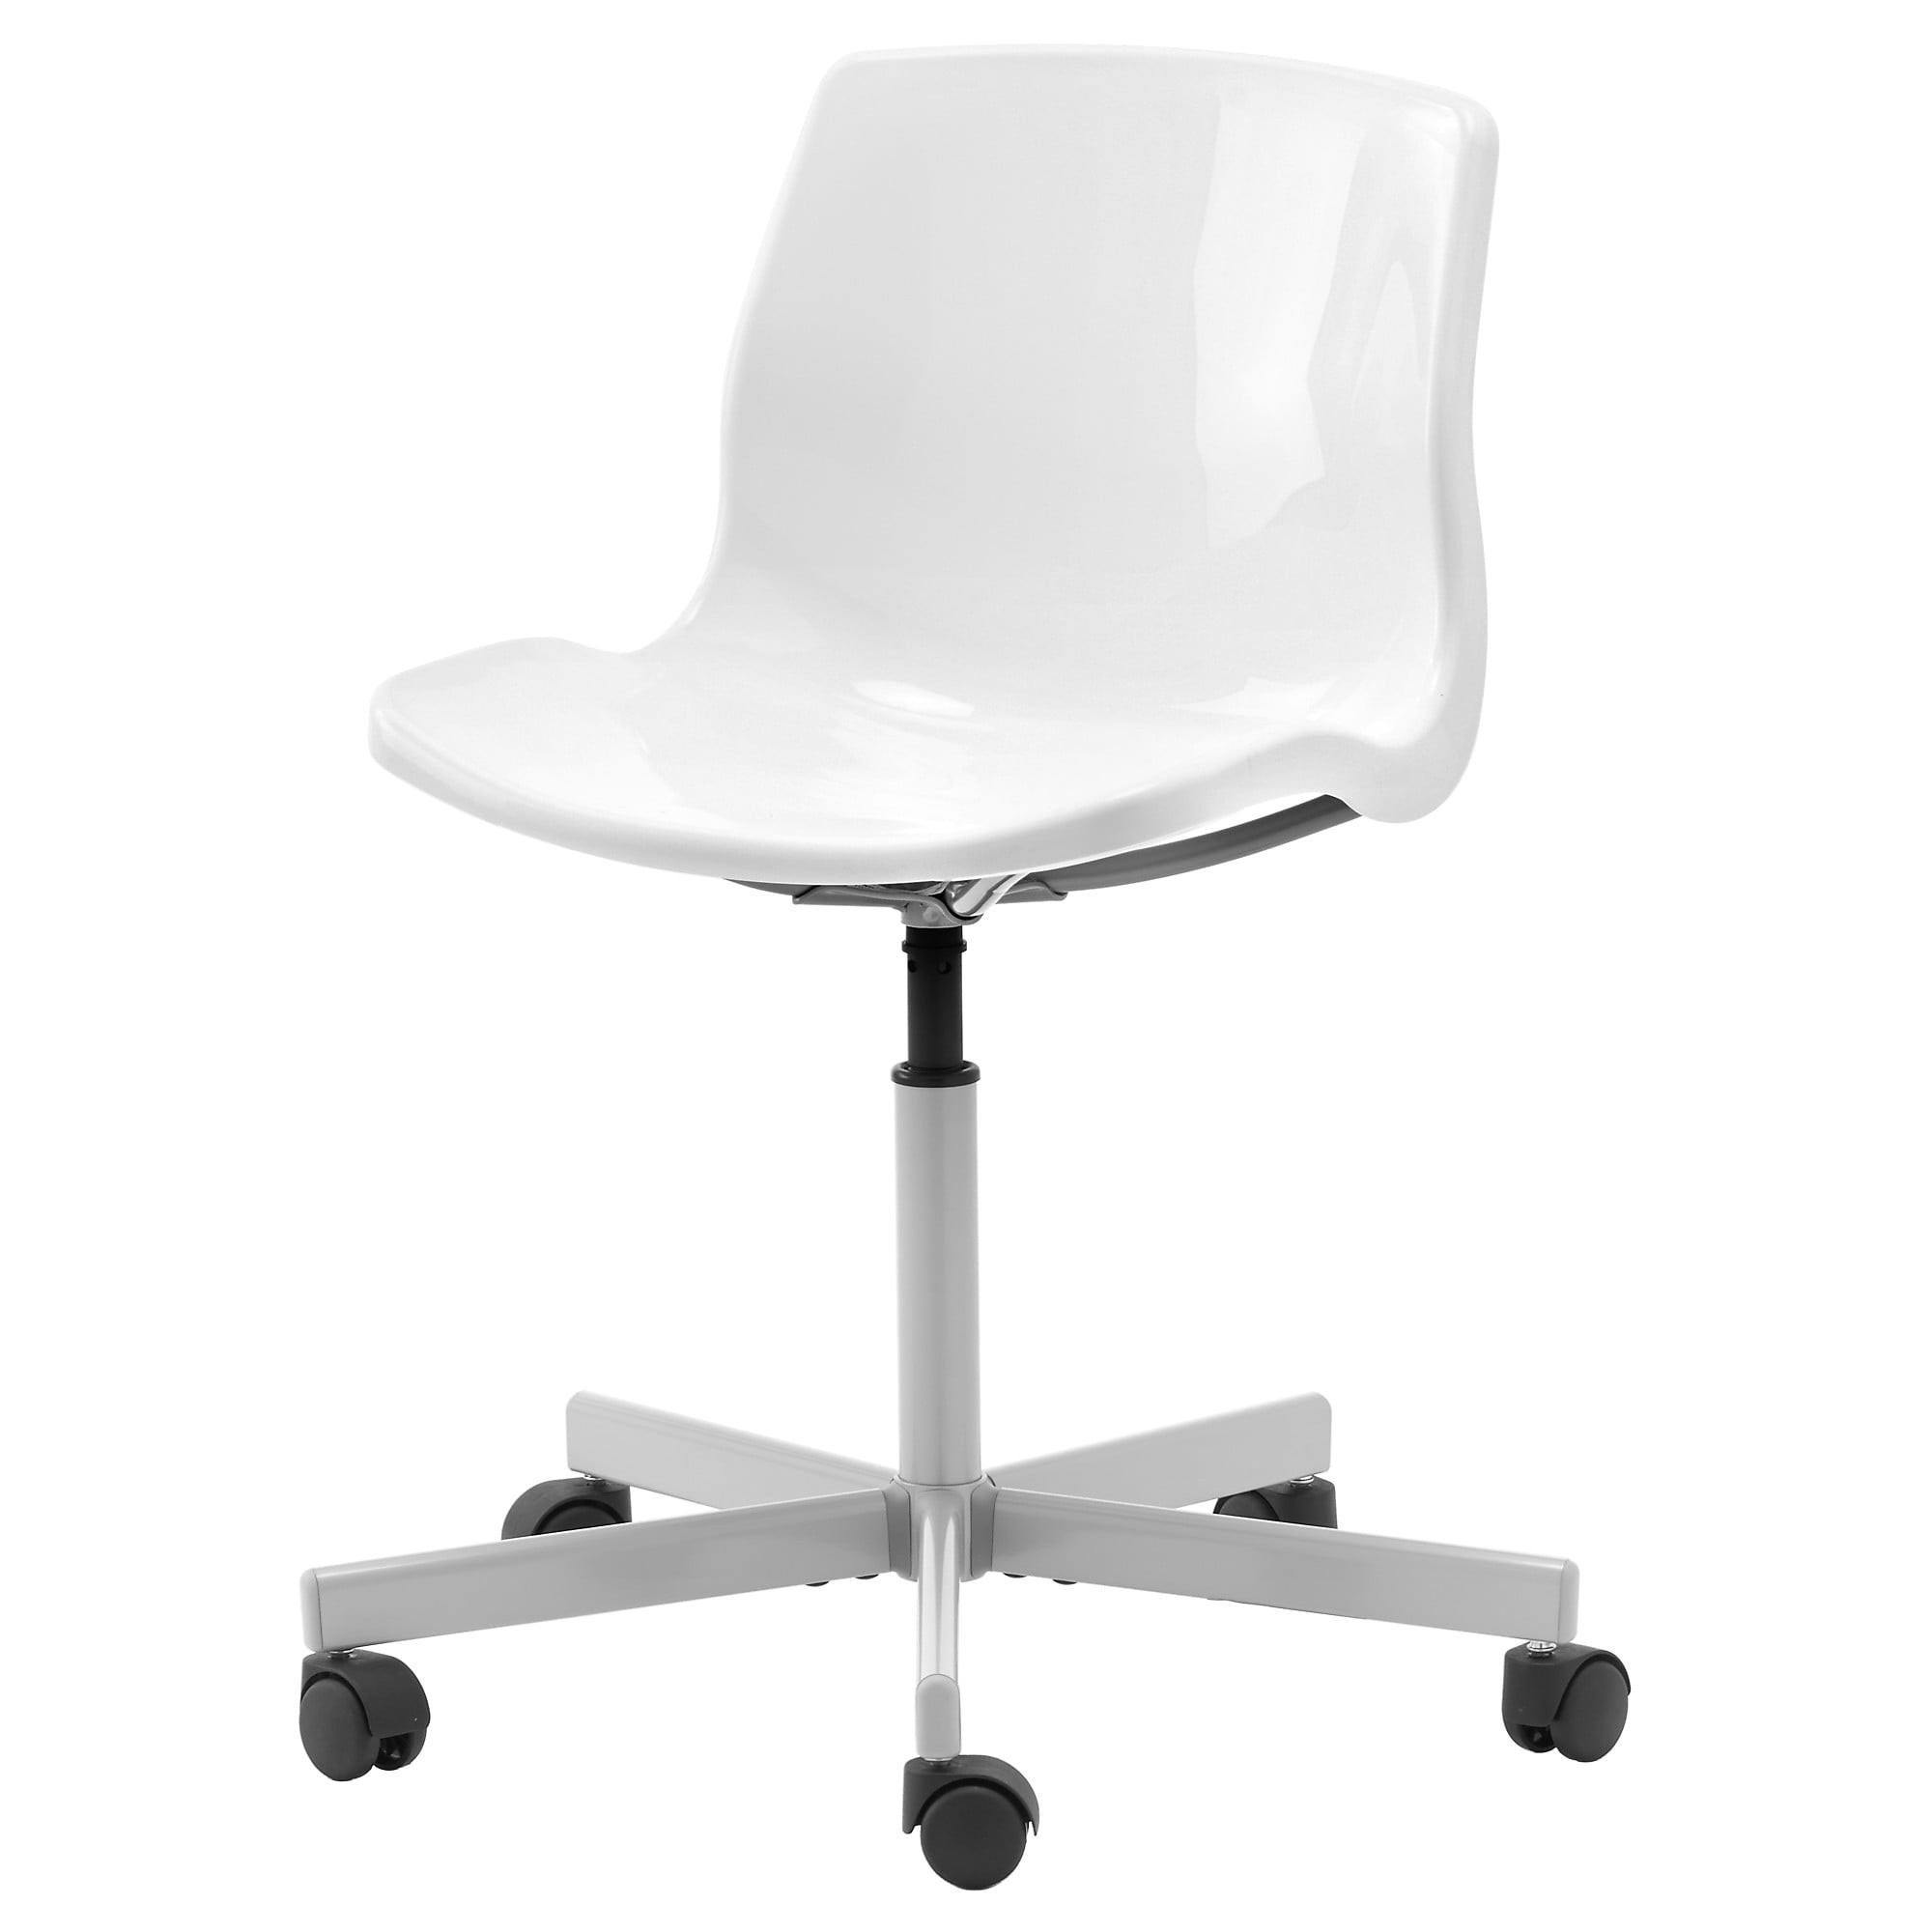 ikea snille swivel chair you sit comfortably since the chair is adjustable in height